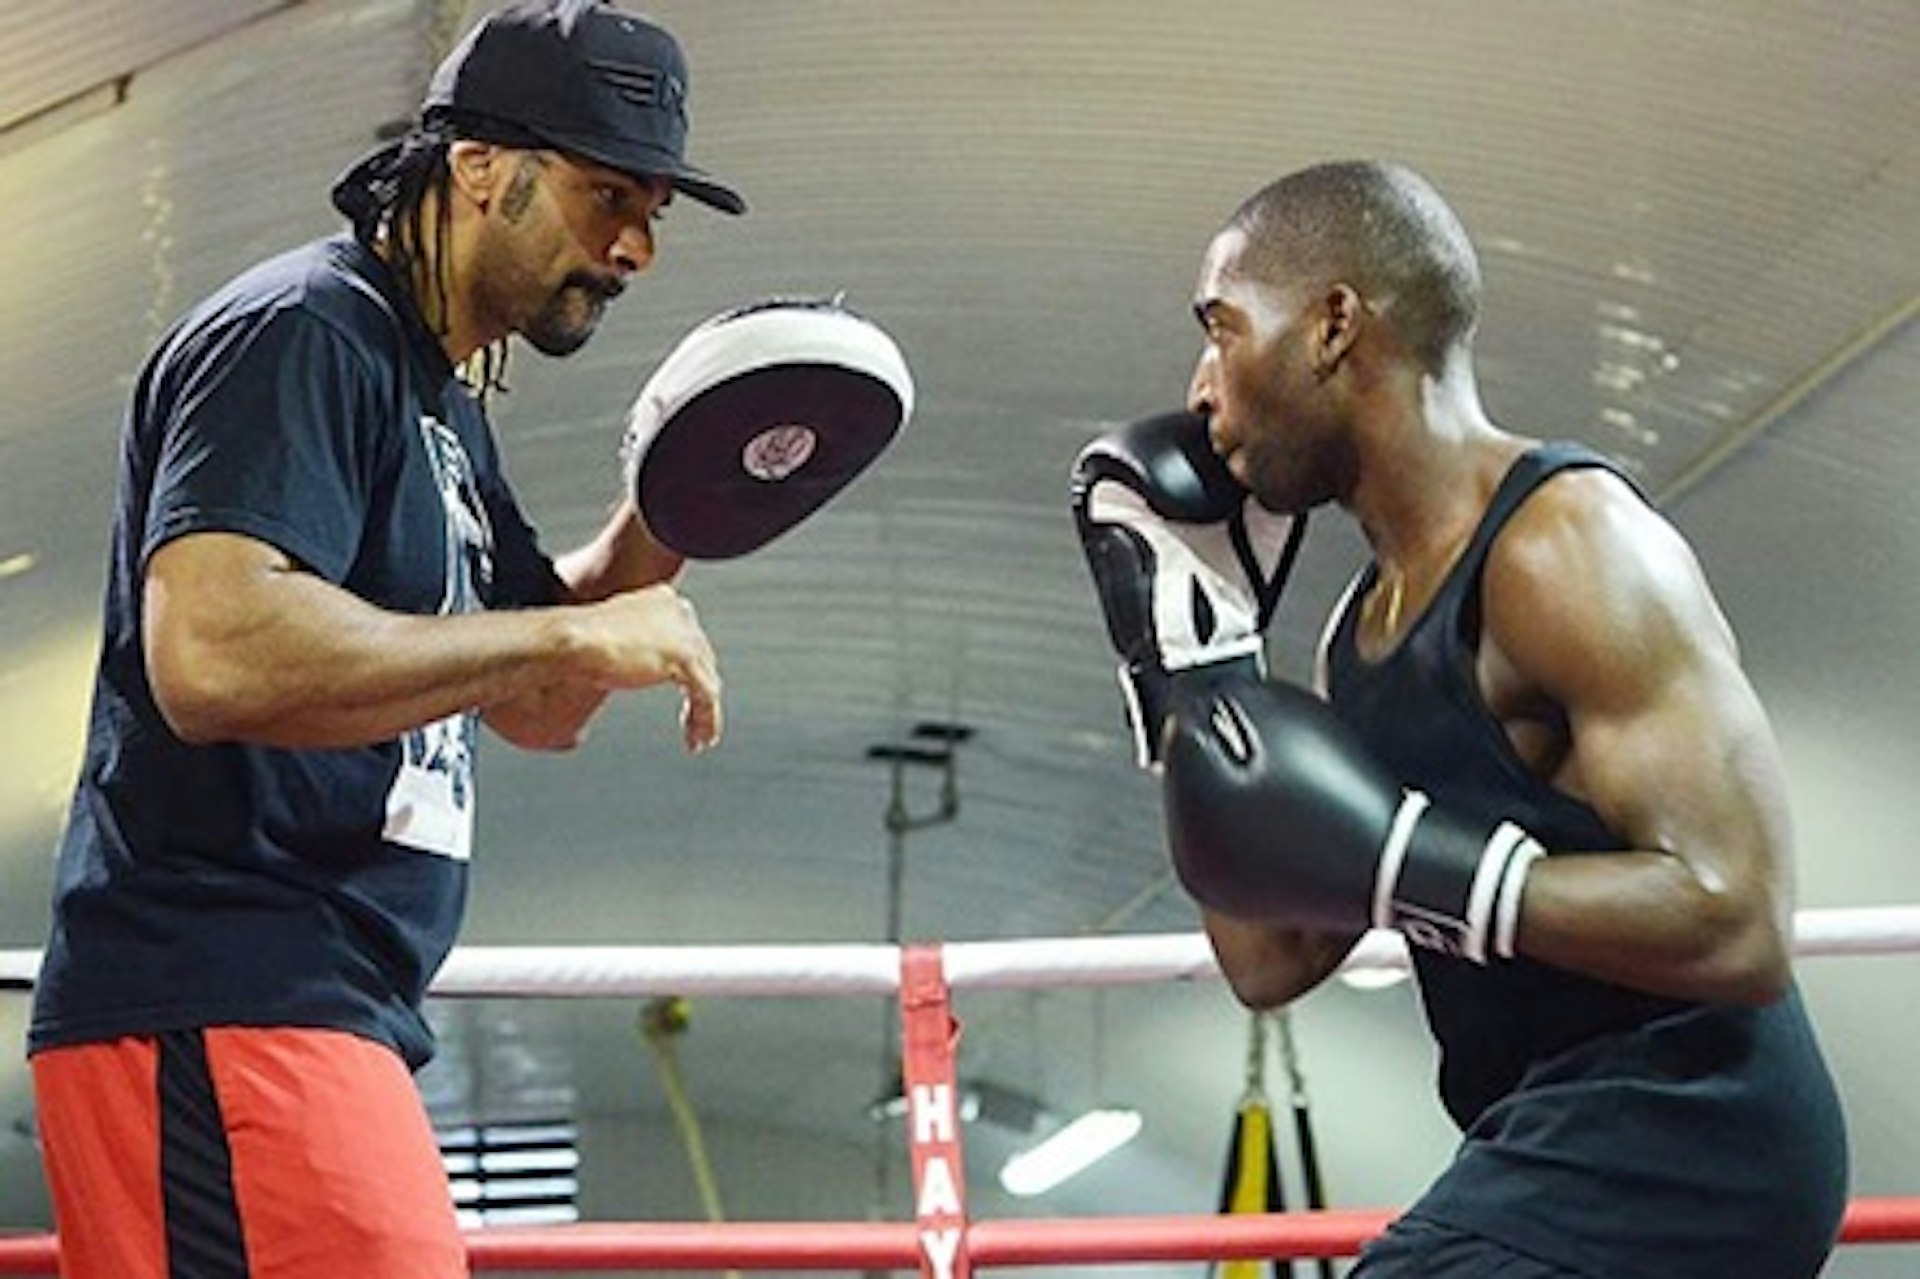 The Hayemaker Ultimate Training Morning with 121 Session in the Ring with David Haye 1